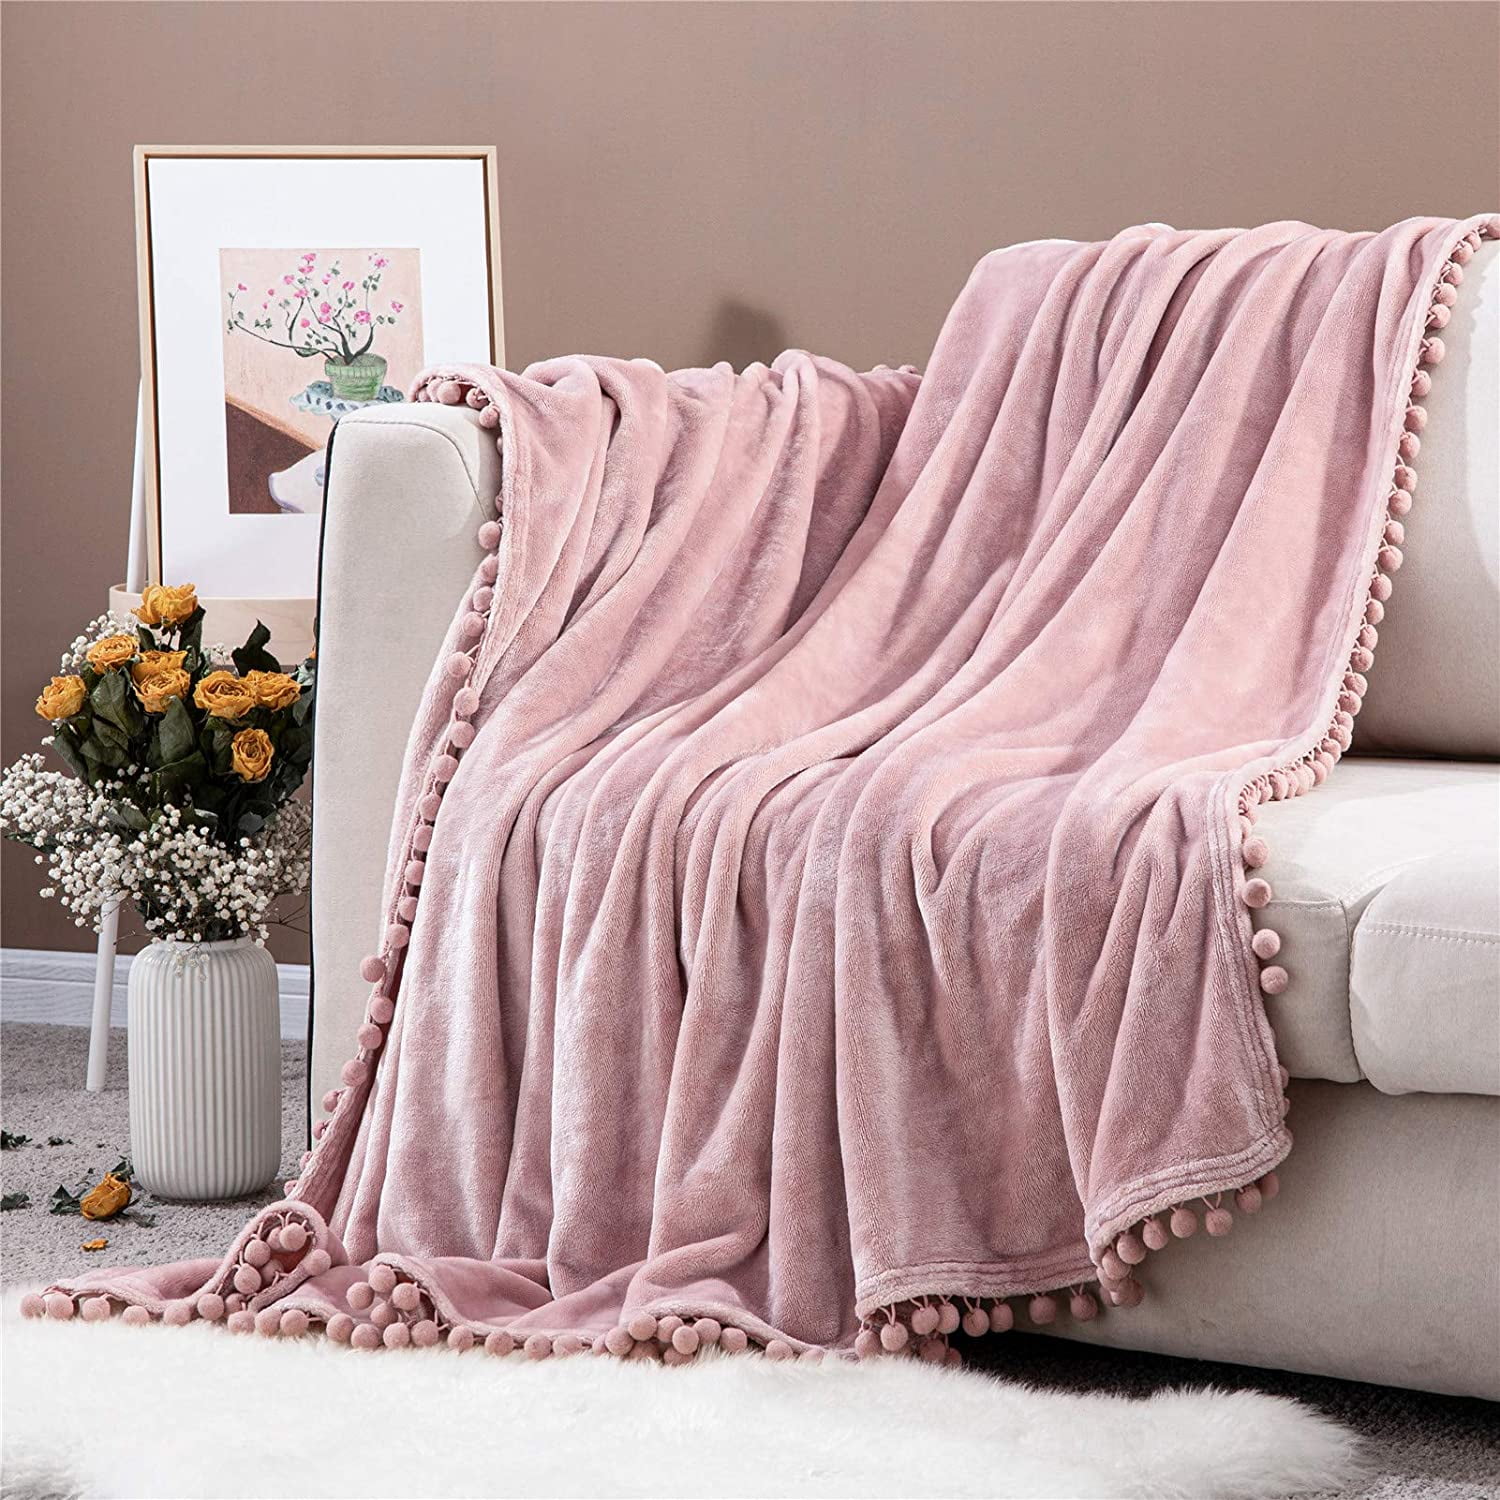 Home Fleece Throw Blanket Full Size Pink Flowers Romantic Pattern Lightweight Flannel Blankets for Couch Bed Living Room Warm Fuzzy Plush Throw 50x 80 Sweet 